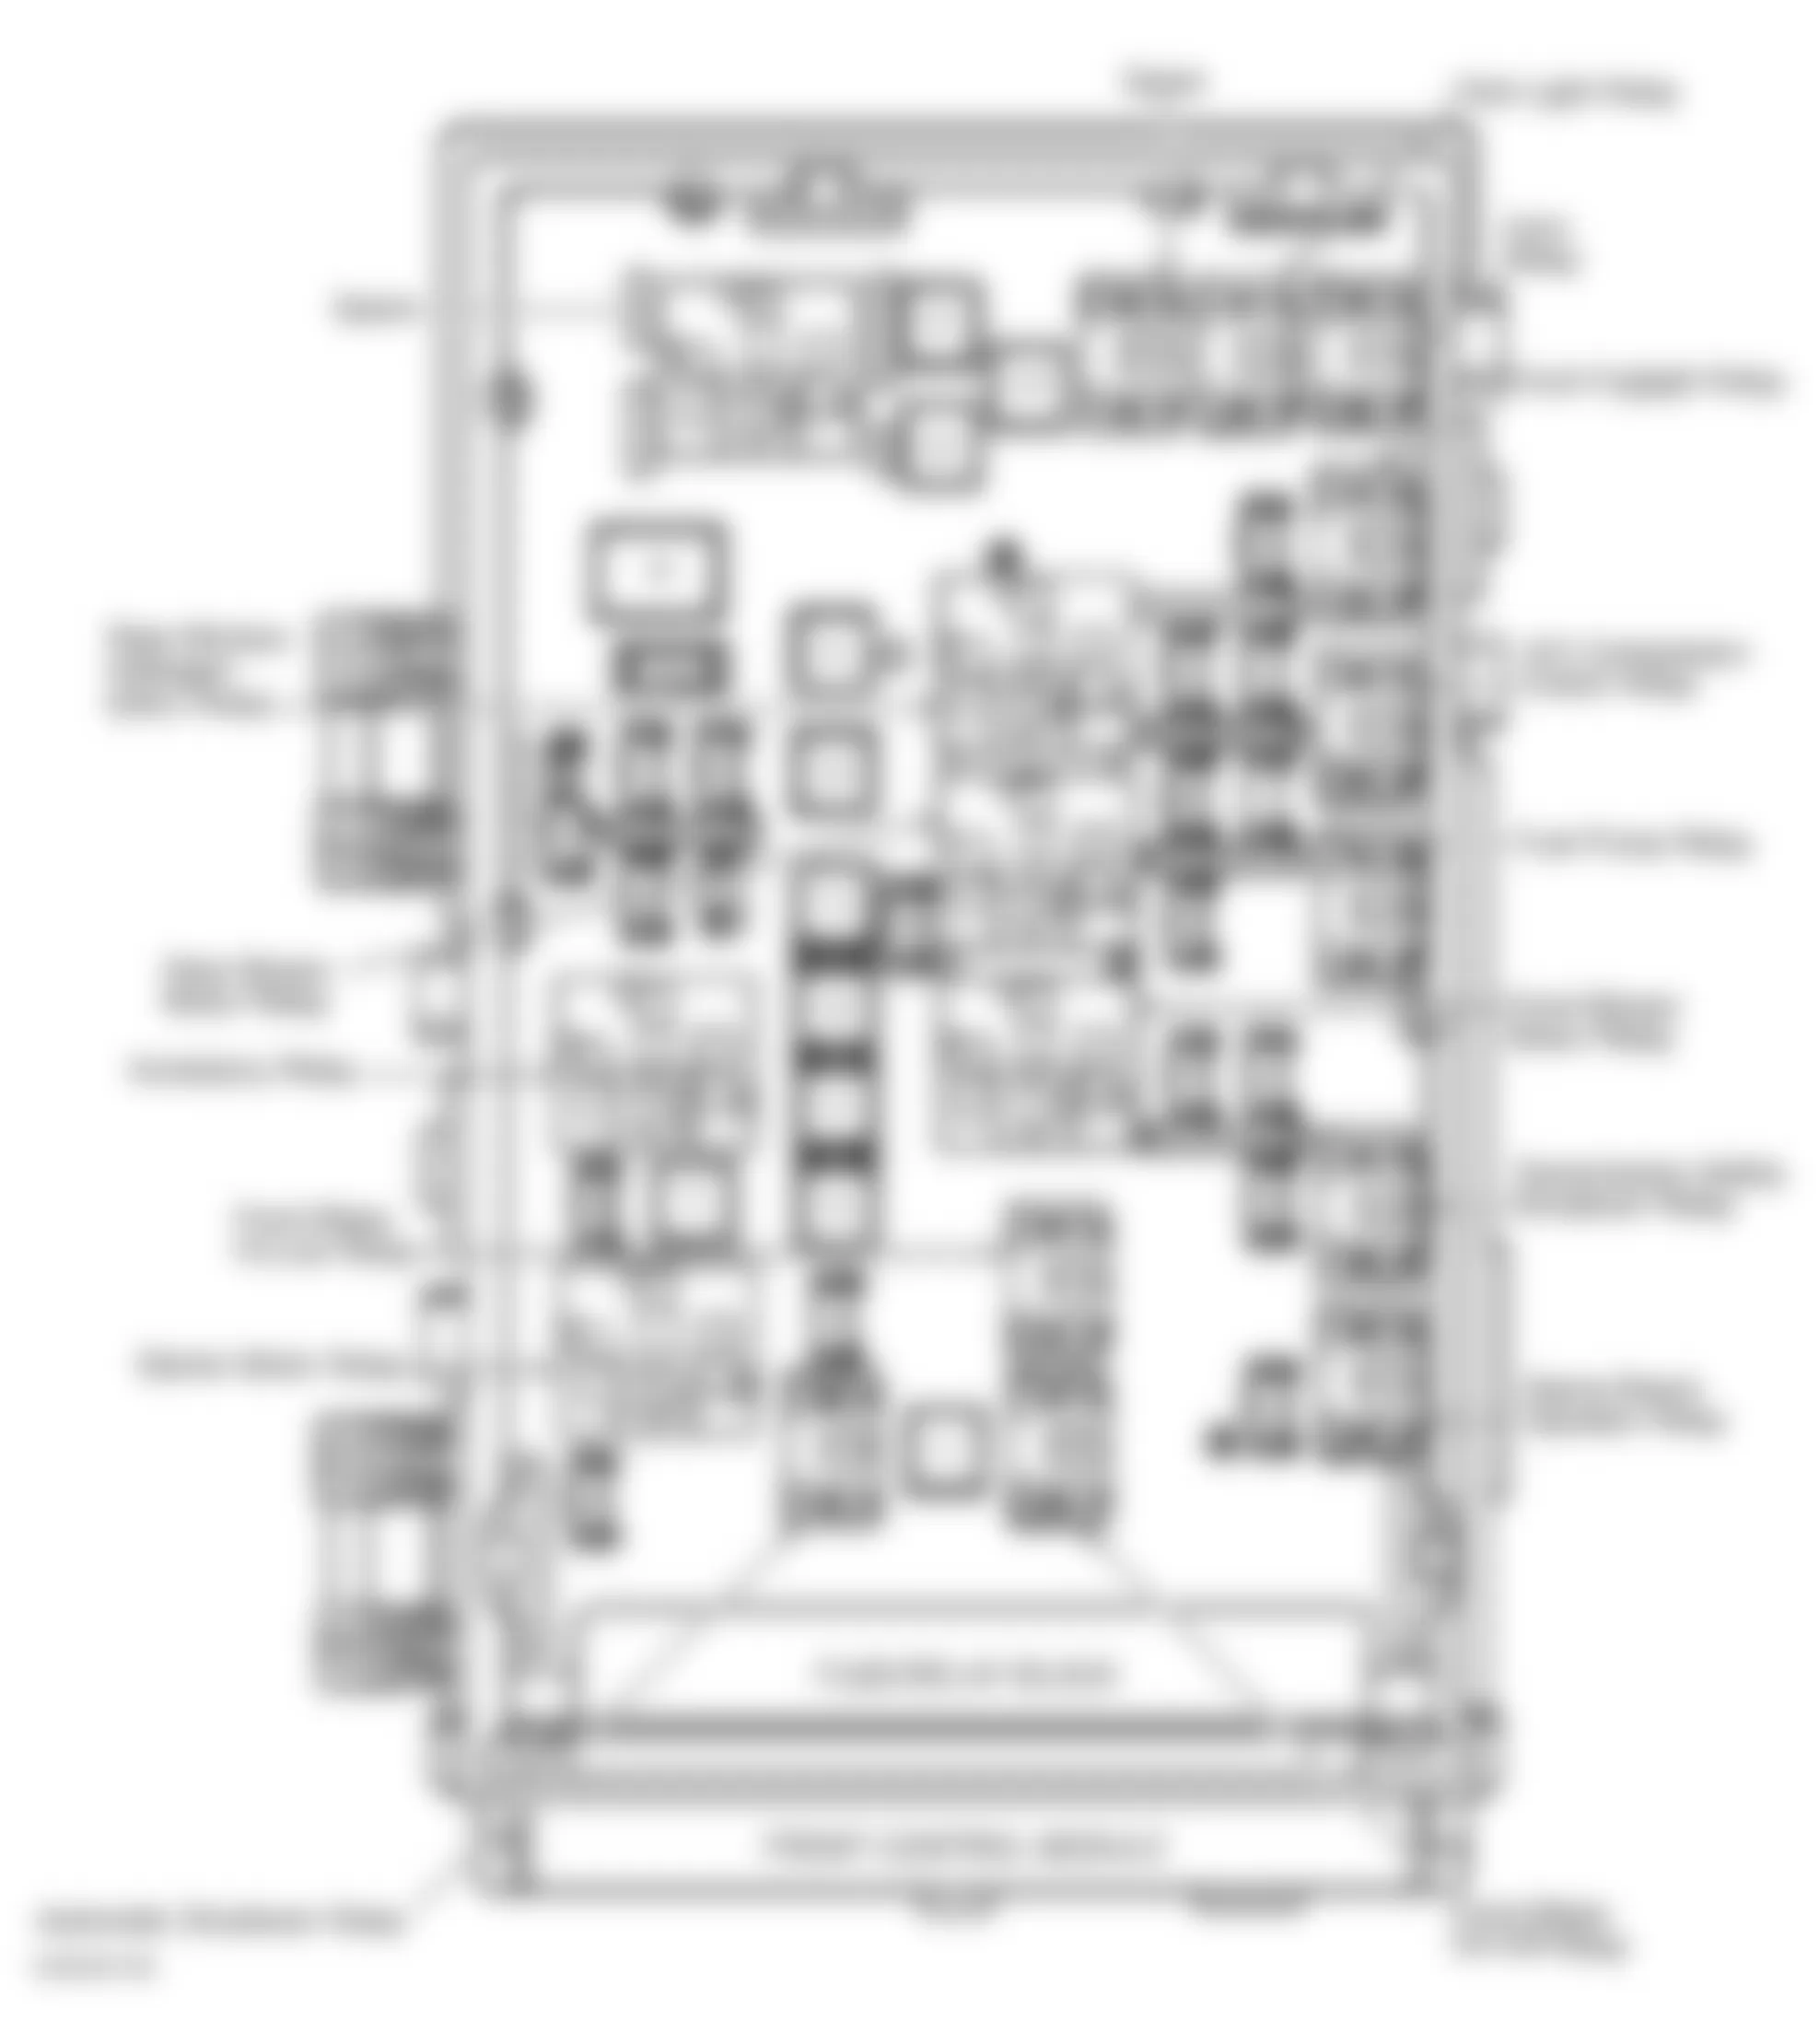 Chrysler Town & Country LXi 2001 - Component Locations -  Identifying Fuse & Relay Center (1 Of 2)